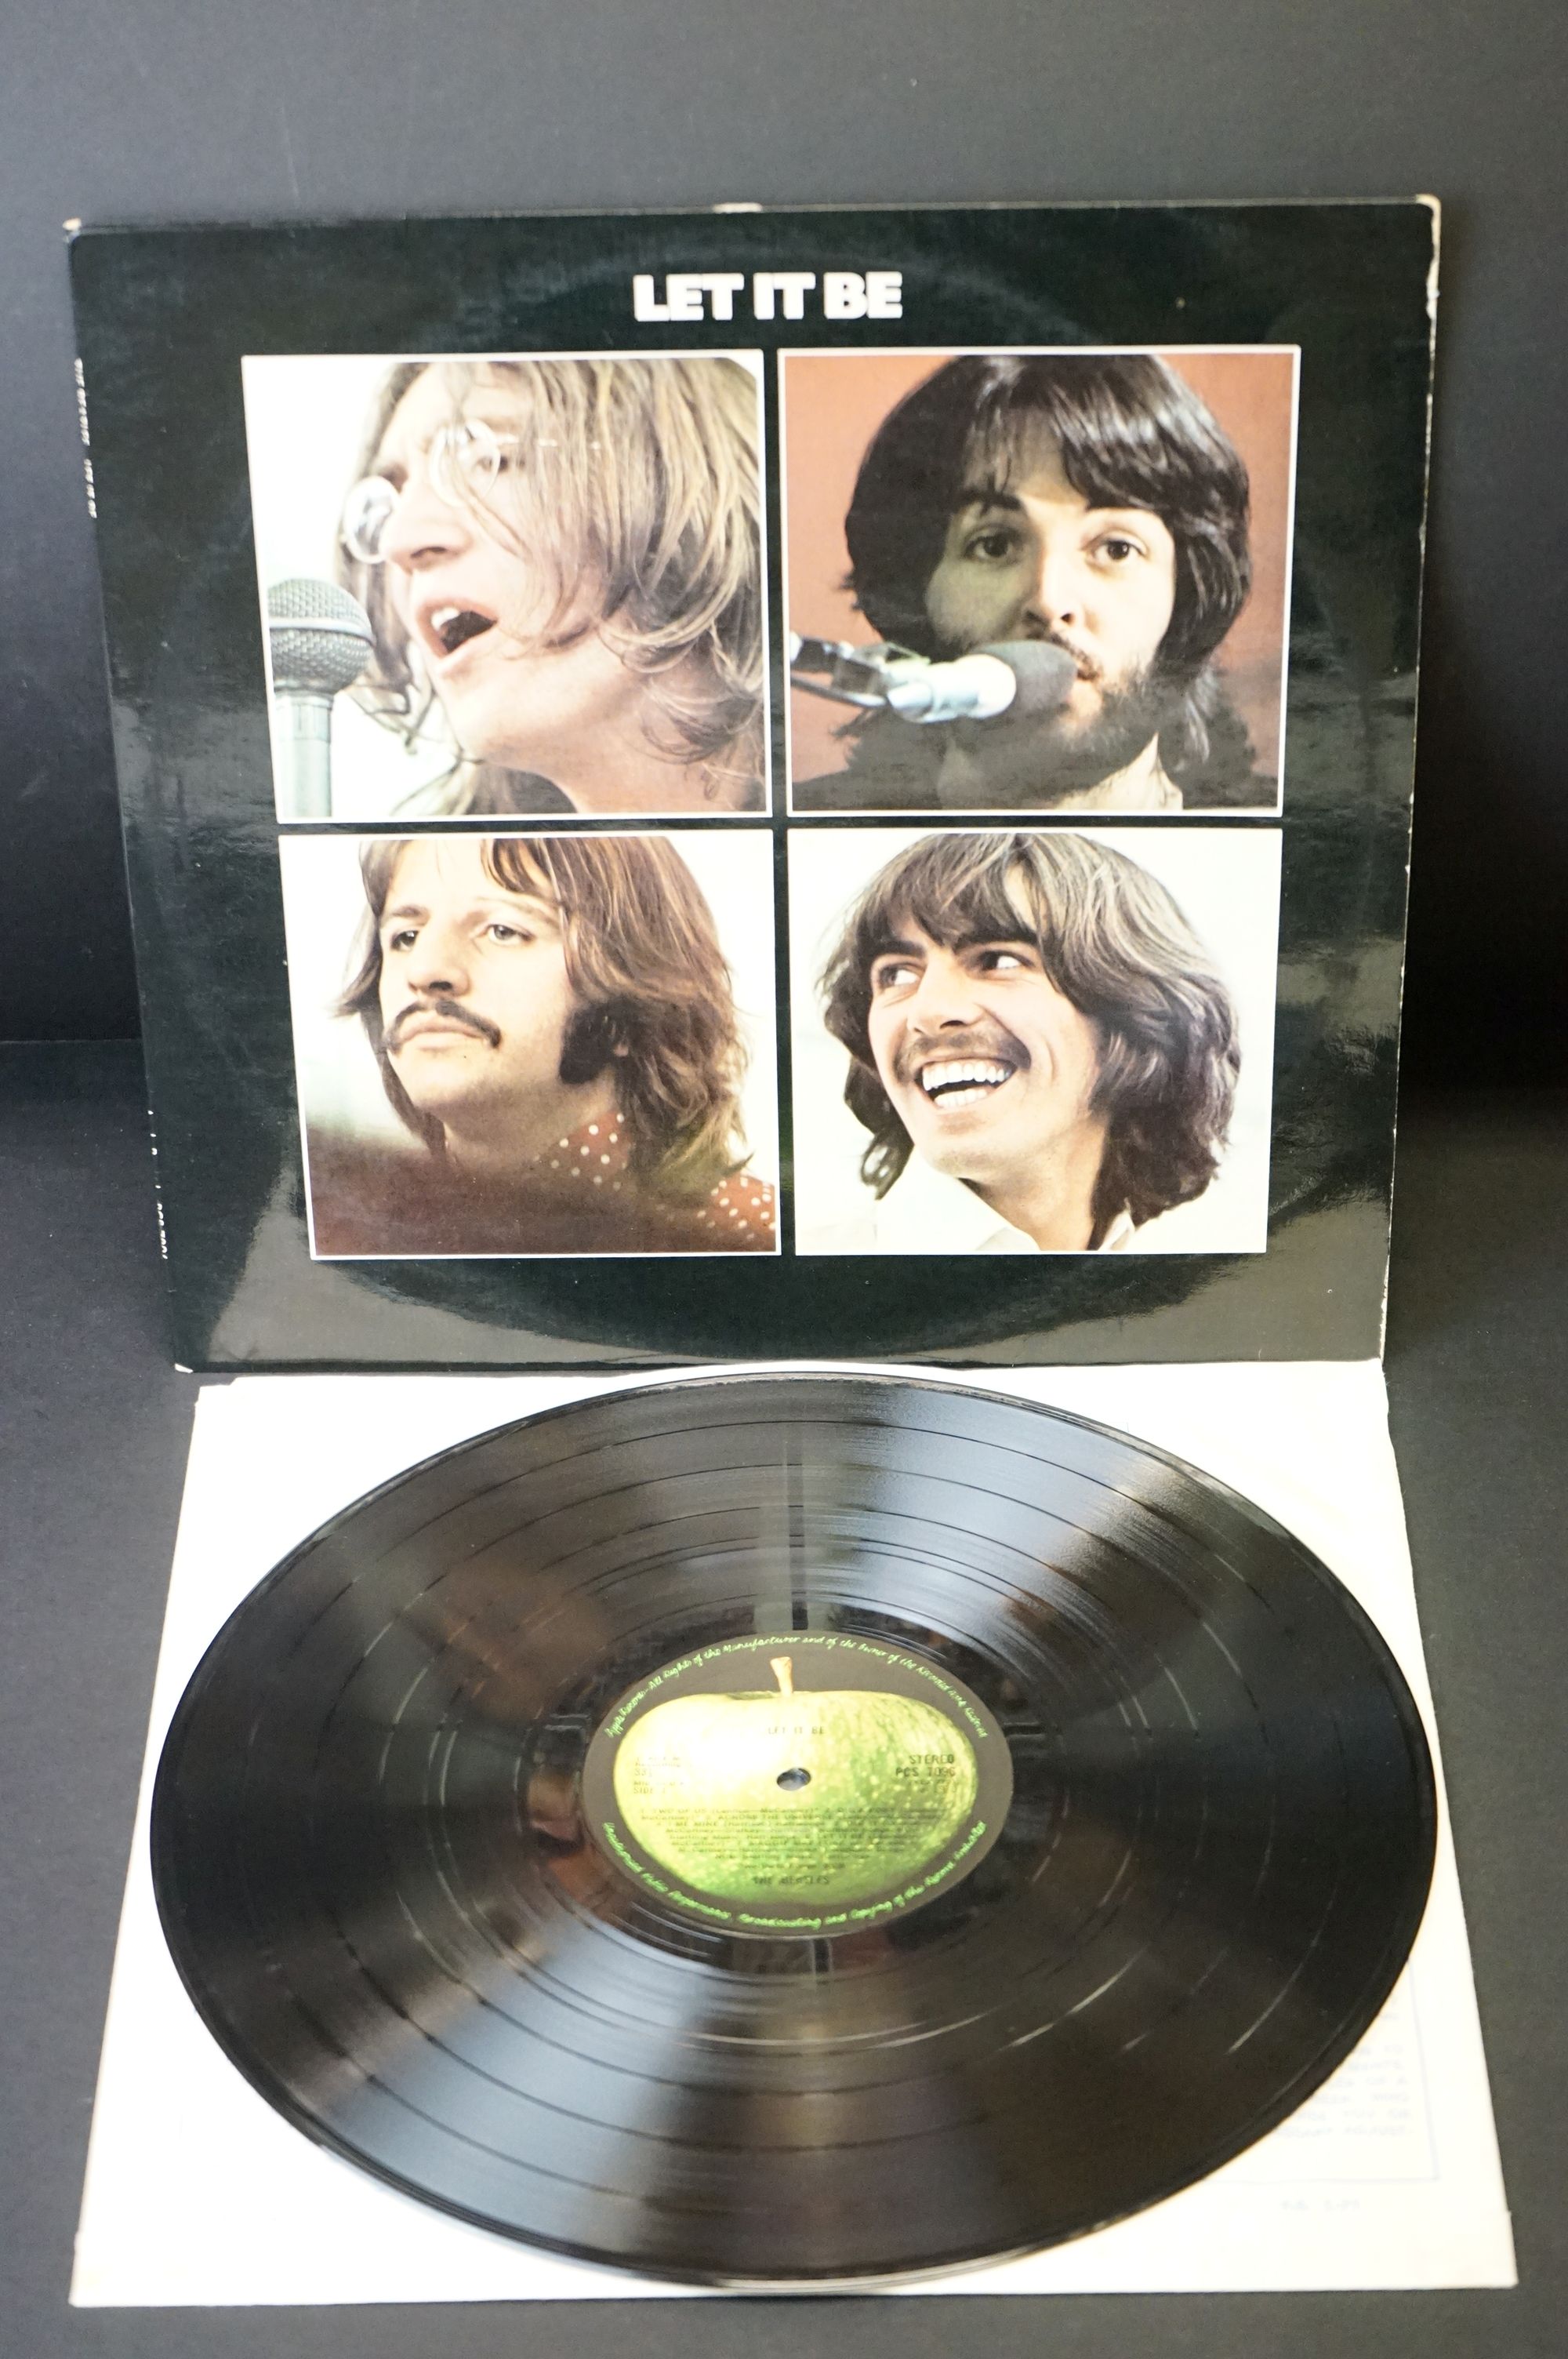 Vinyl - The Beatles Let It Be Box set with LP PCS7090 and Booklet, vinyl vg+, outer box sleeve - Image 6 of 10